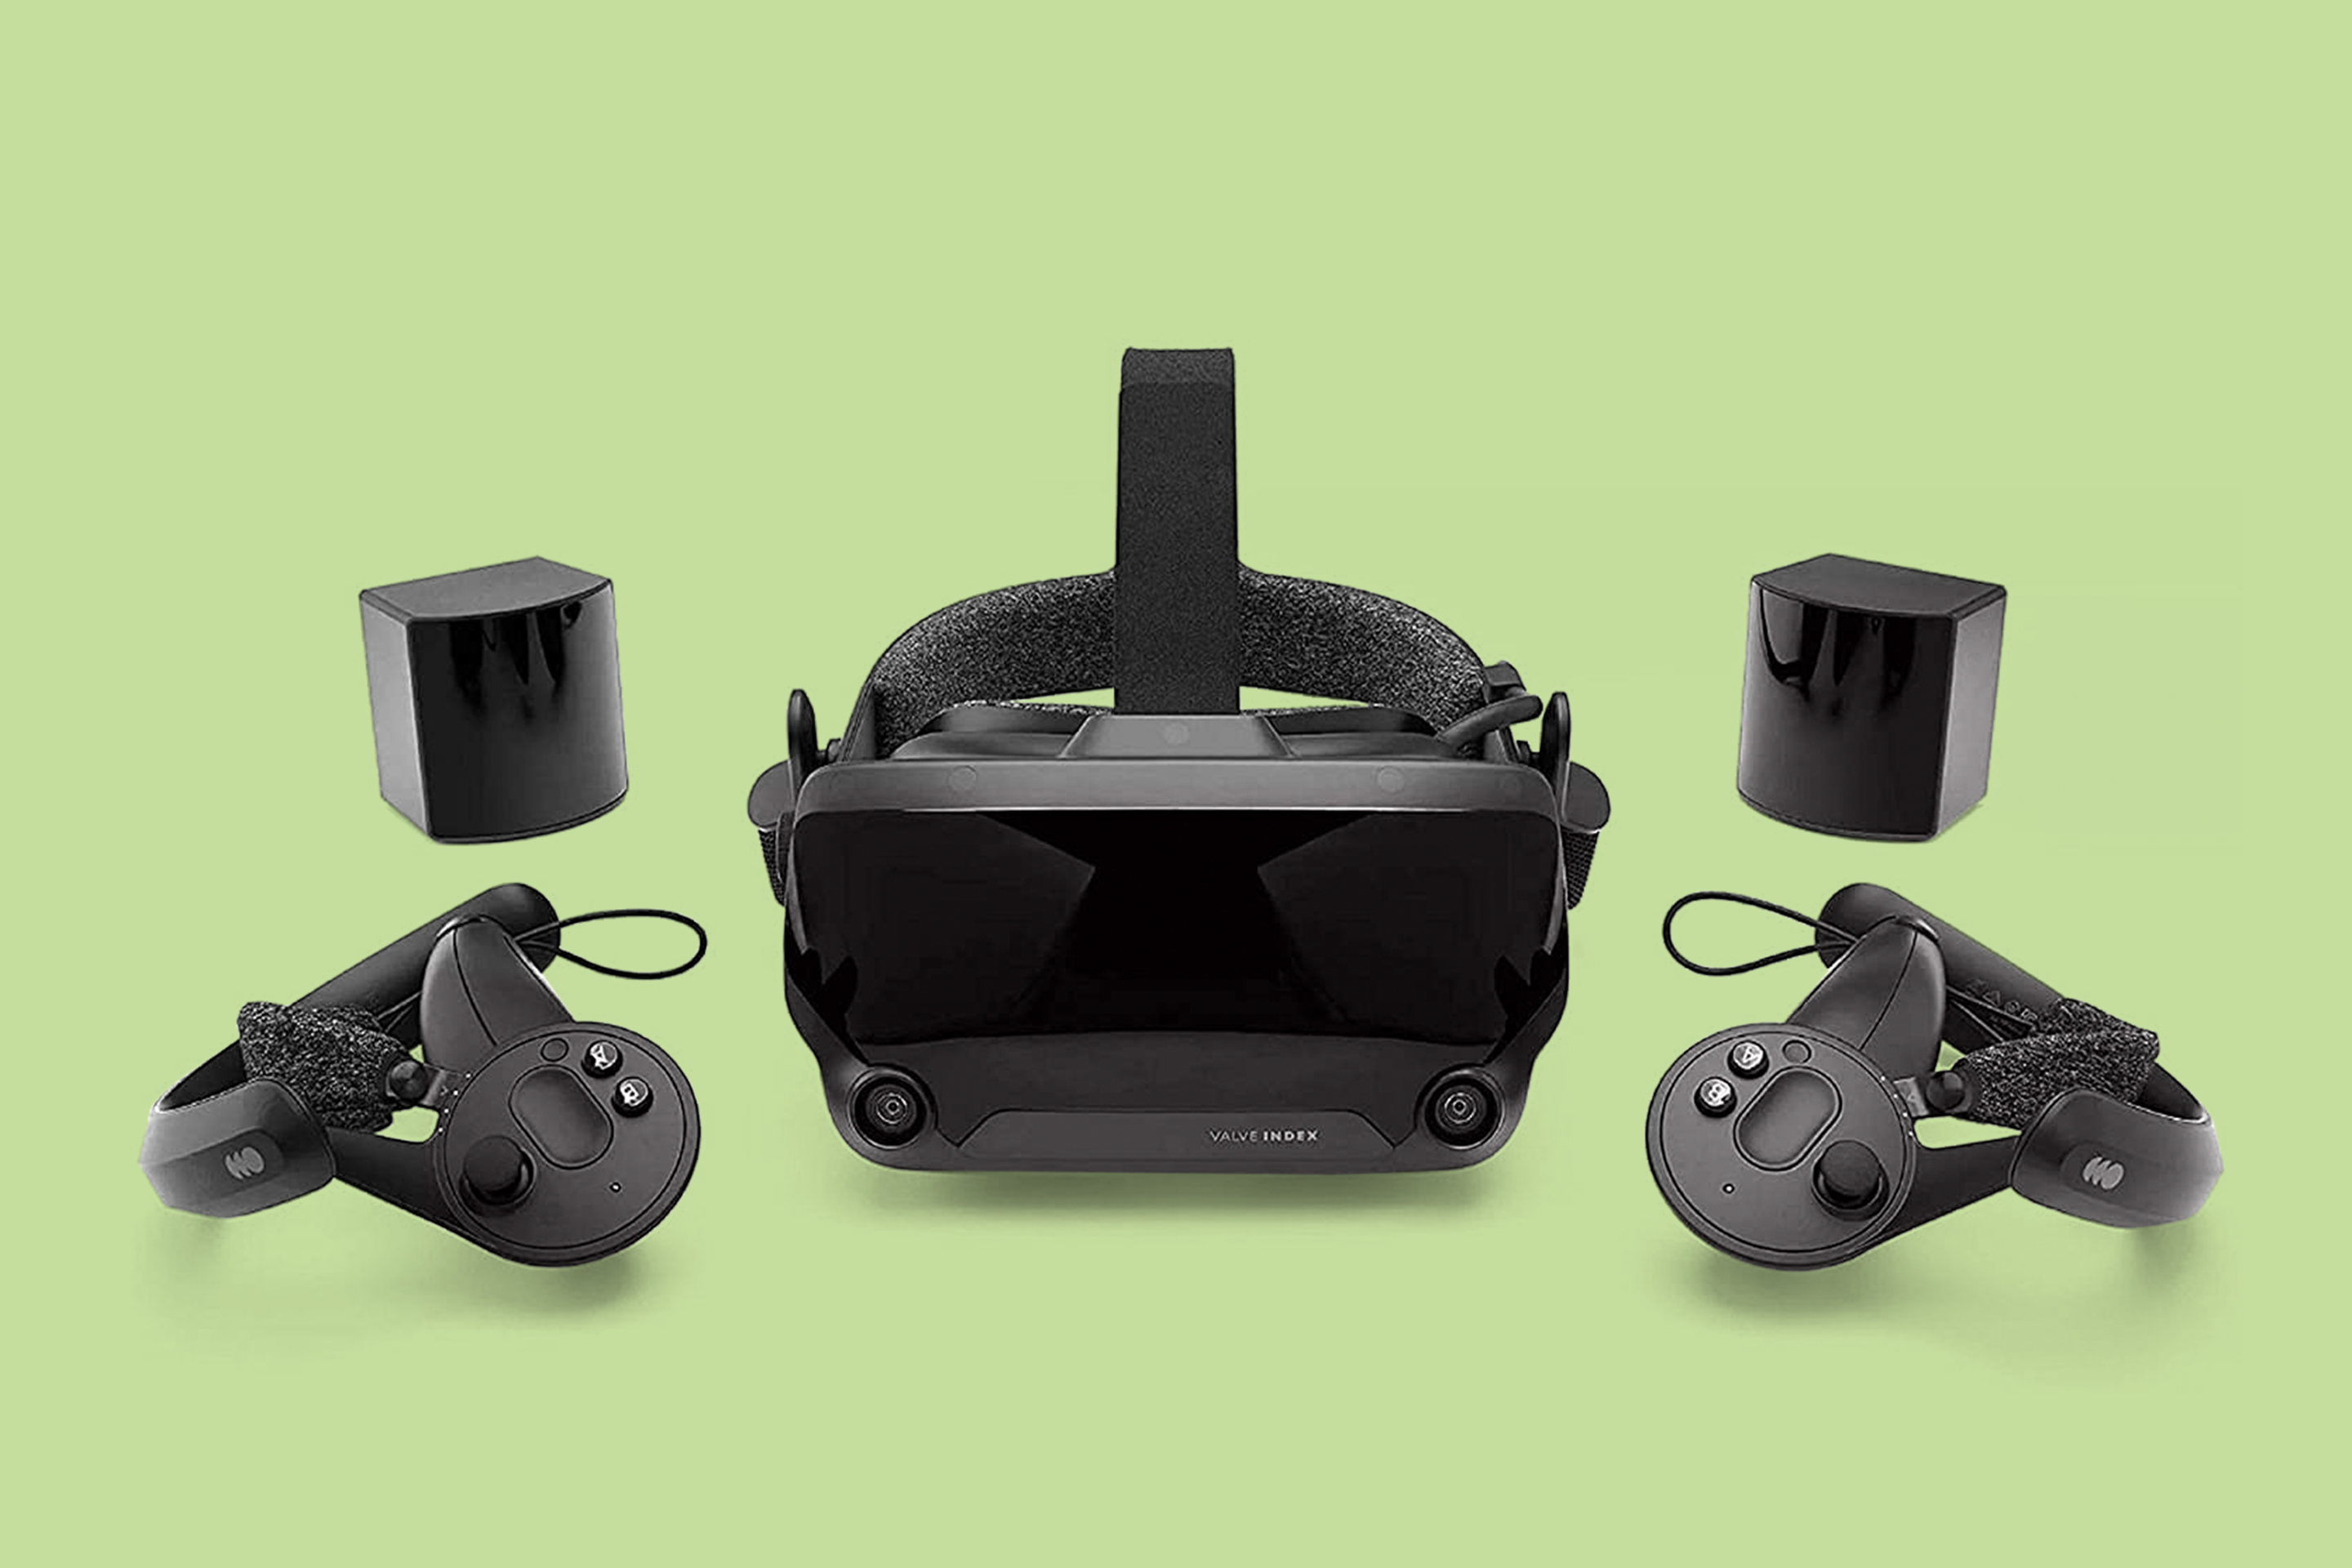 The Best VR Headsets for Your Money